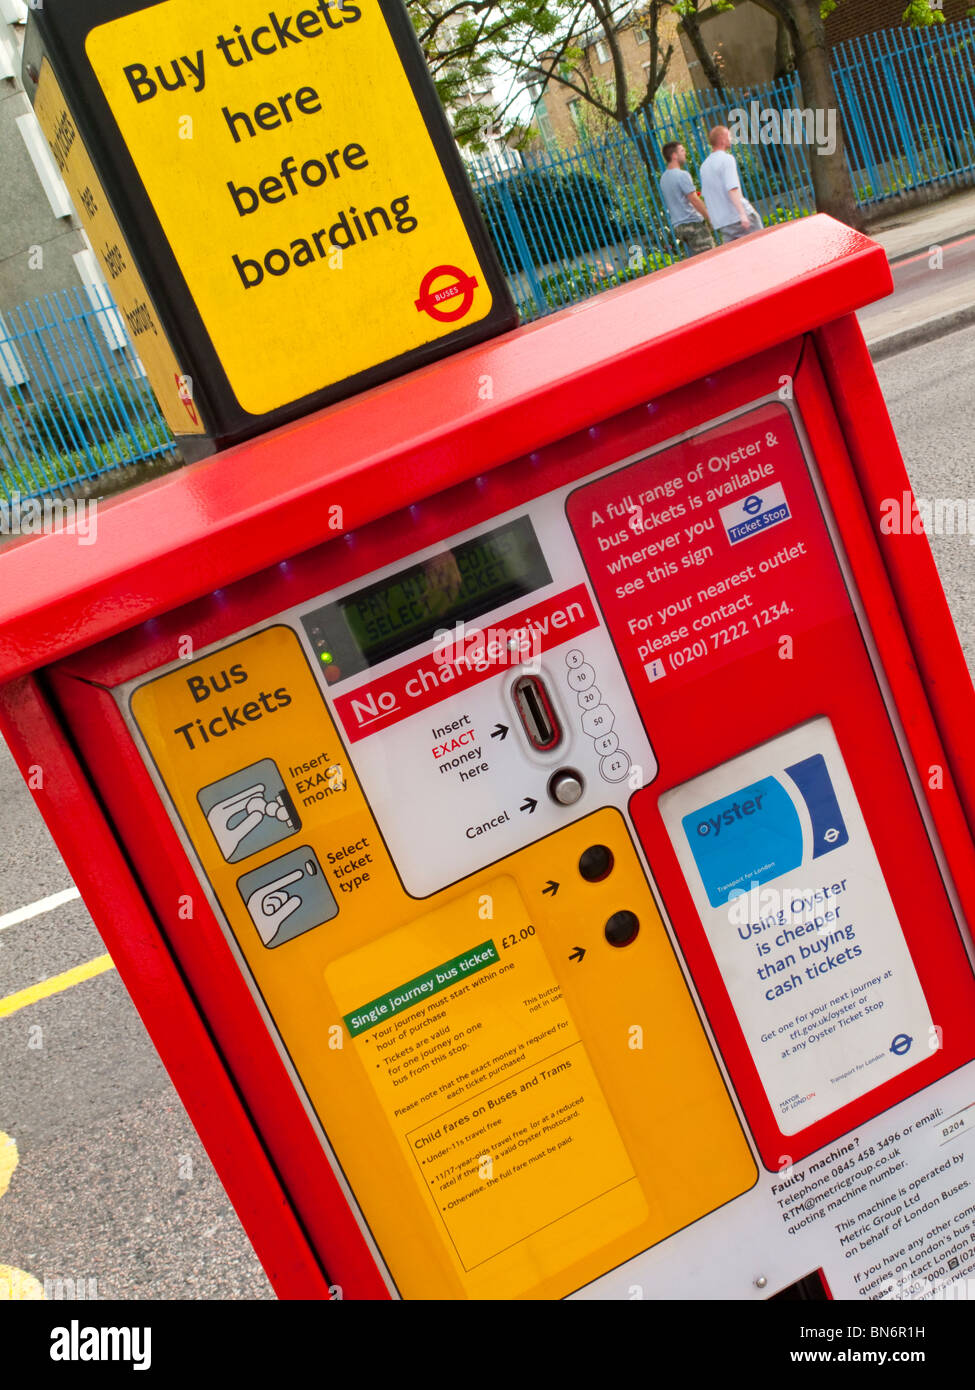 Street ticket vending machine for buses operated by Transport for London in London England UK Stock Photo